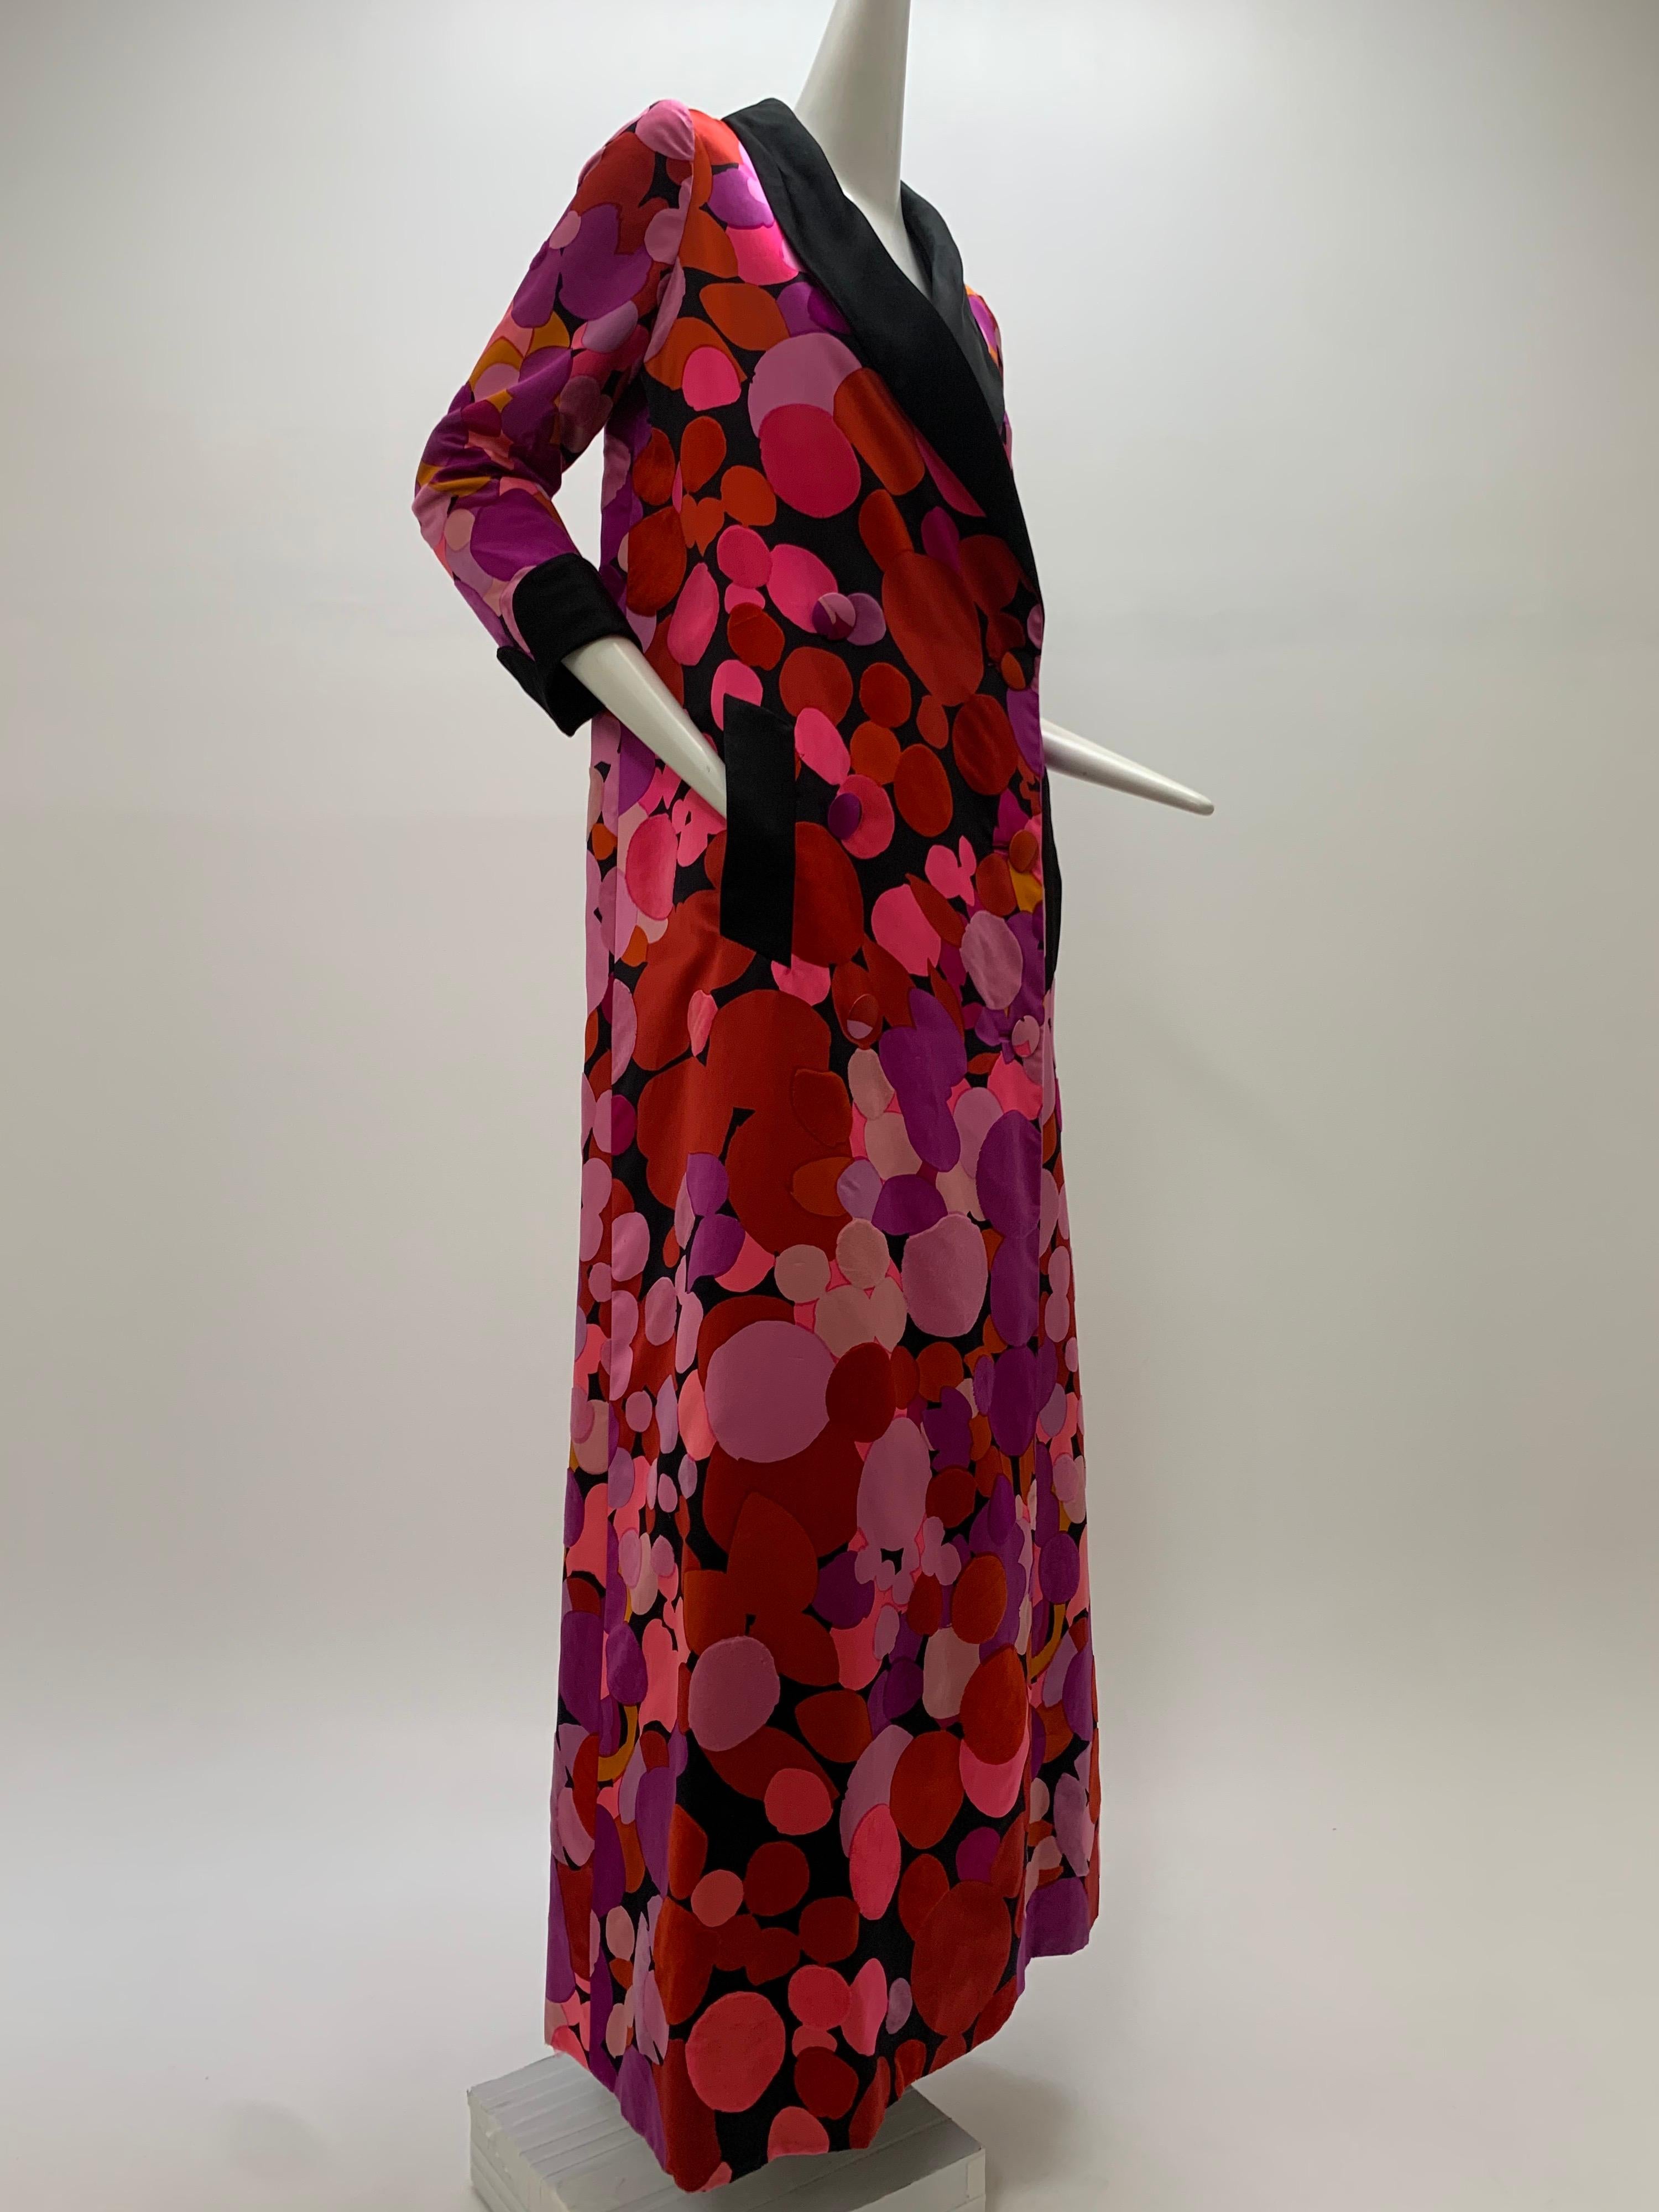 1960s Norman Norell silk satin opera coat/maxi coat with abstract polka-dot print and flocked velvet dots scattered throughout pattern. Fully lined in black silk and black collar, cuffs and pocket flaps.. Double breasted. Size 6